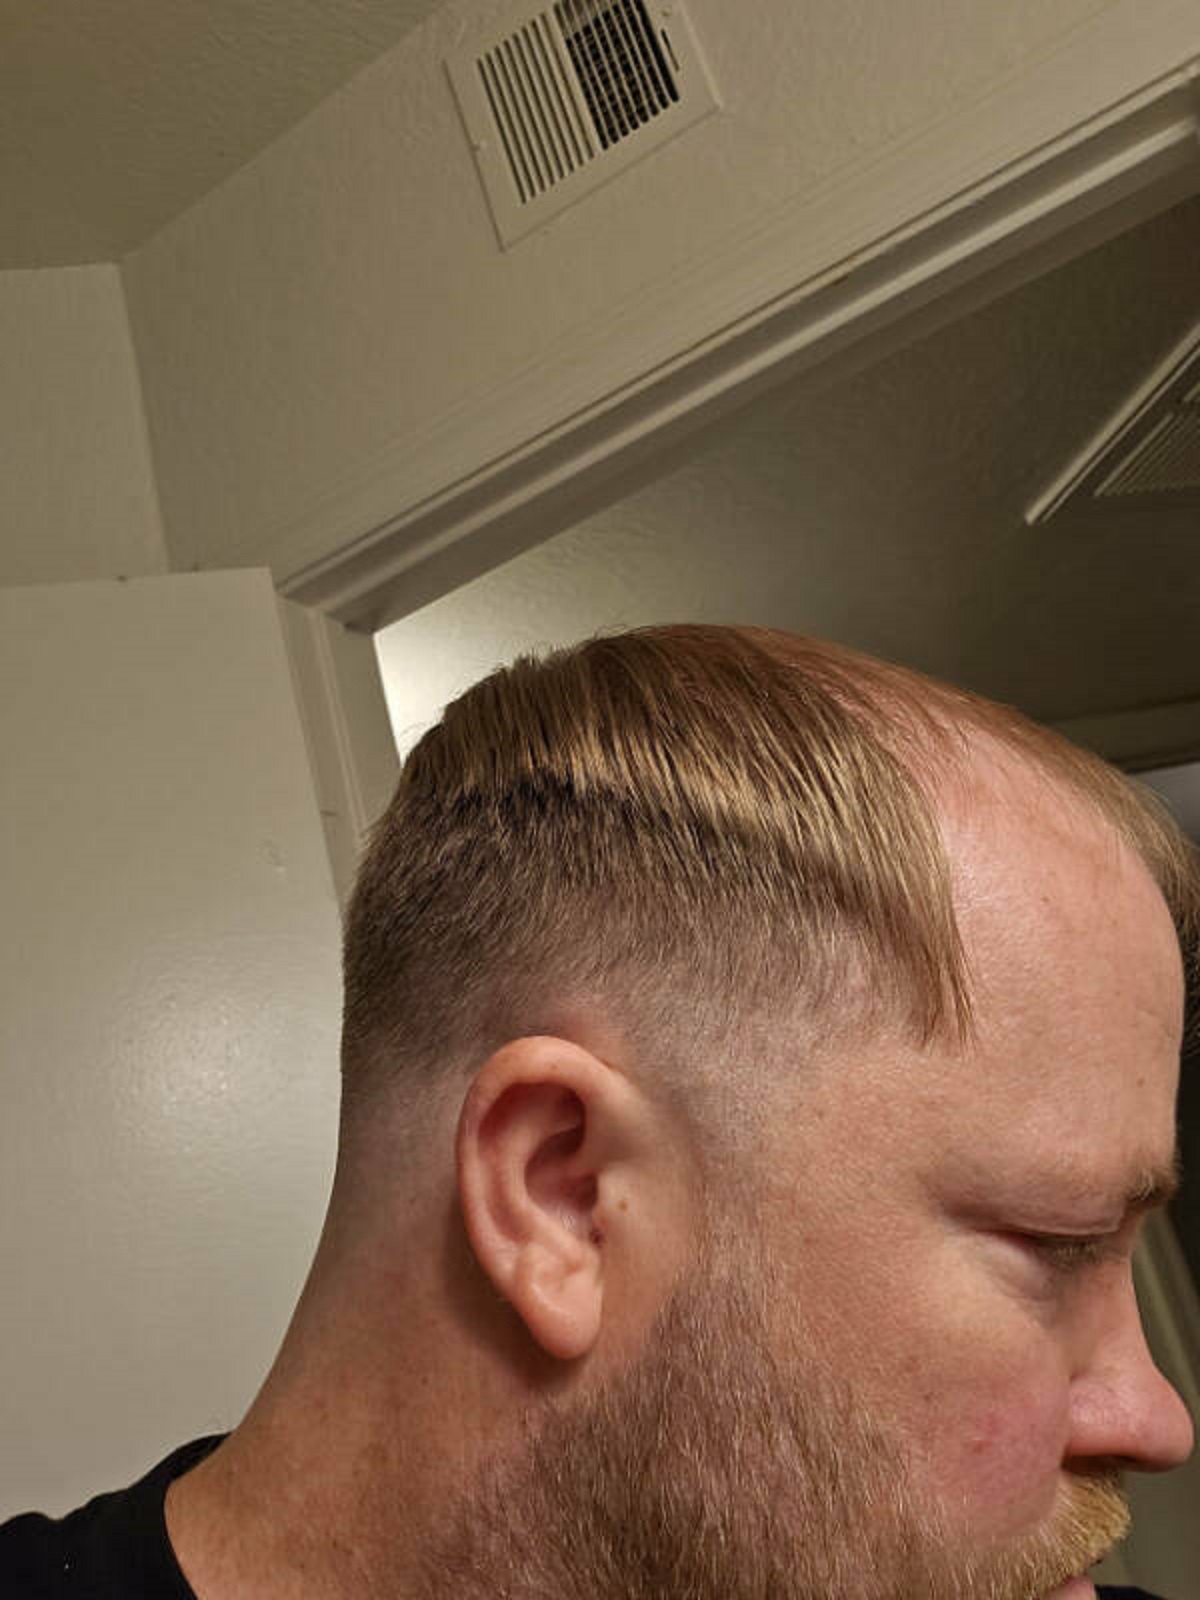 “Asked for a fade and got this.”